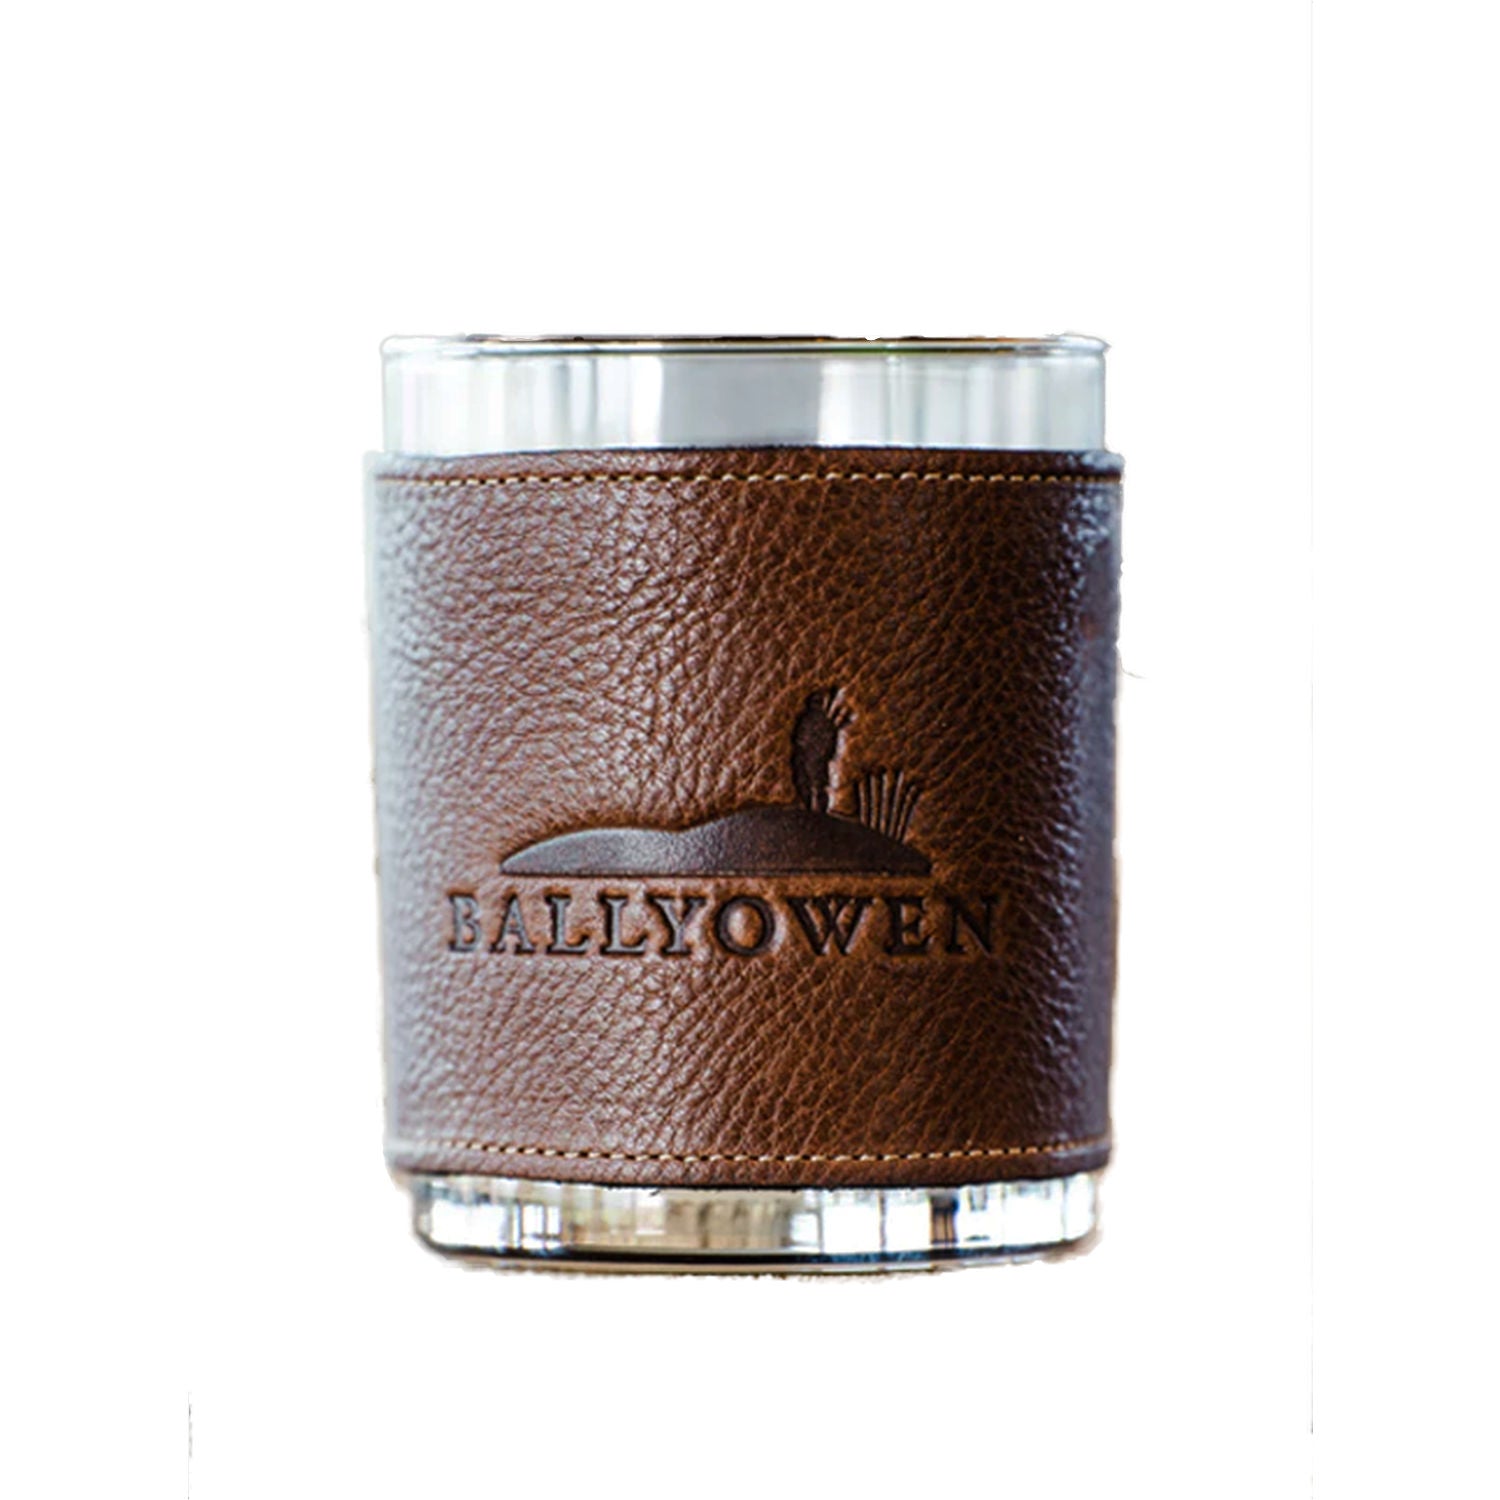 Ballyowen Leather Bound Rock Glasses - Set of Two